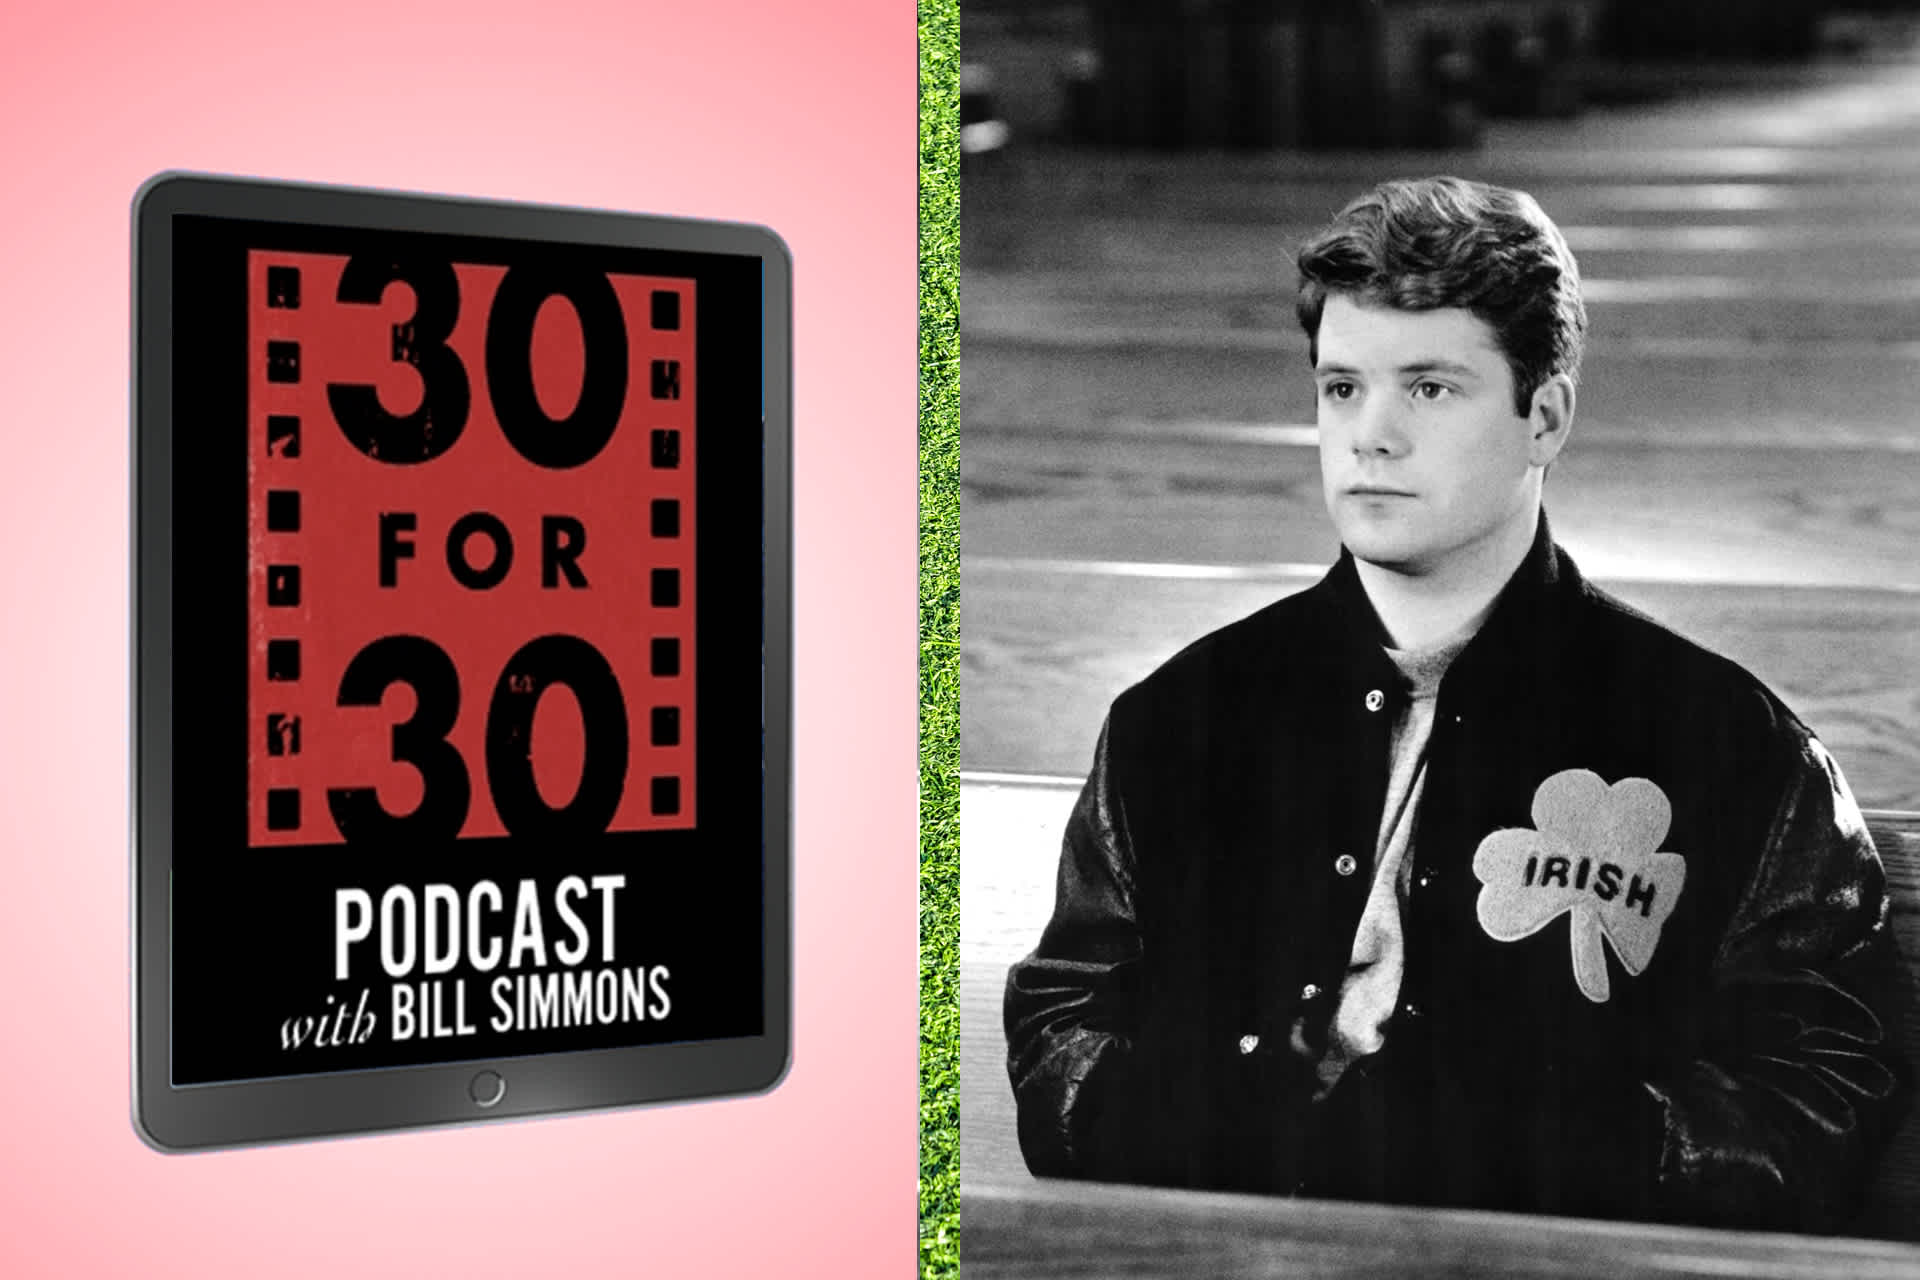 Photo Gallery - 30 for 30 Podcasts